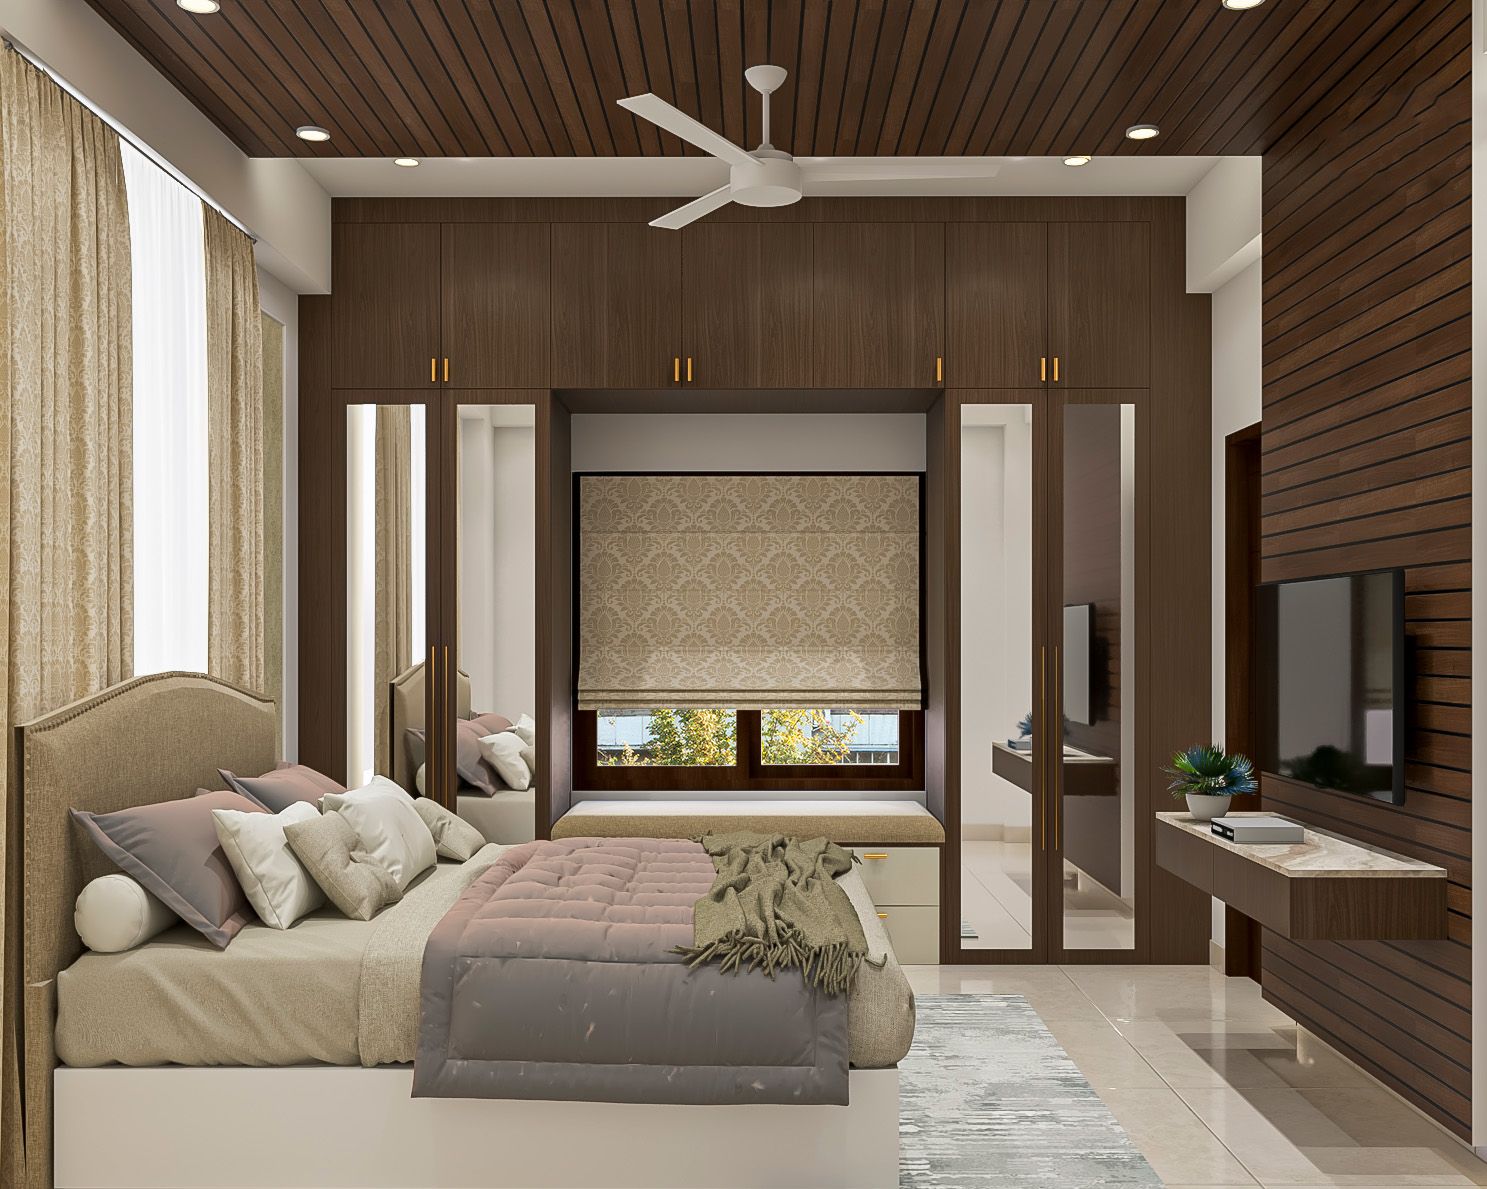 Classic Wooden Floor-To-Ceiling Bedroom Ceiling Design With Panels